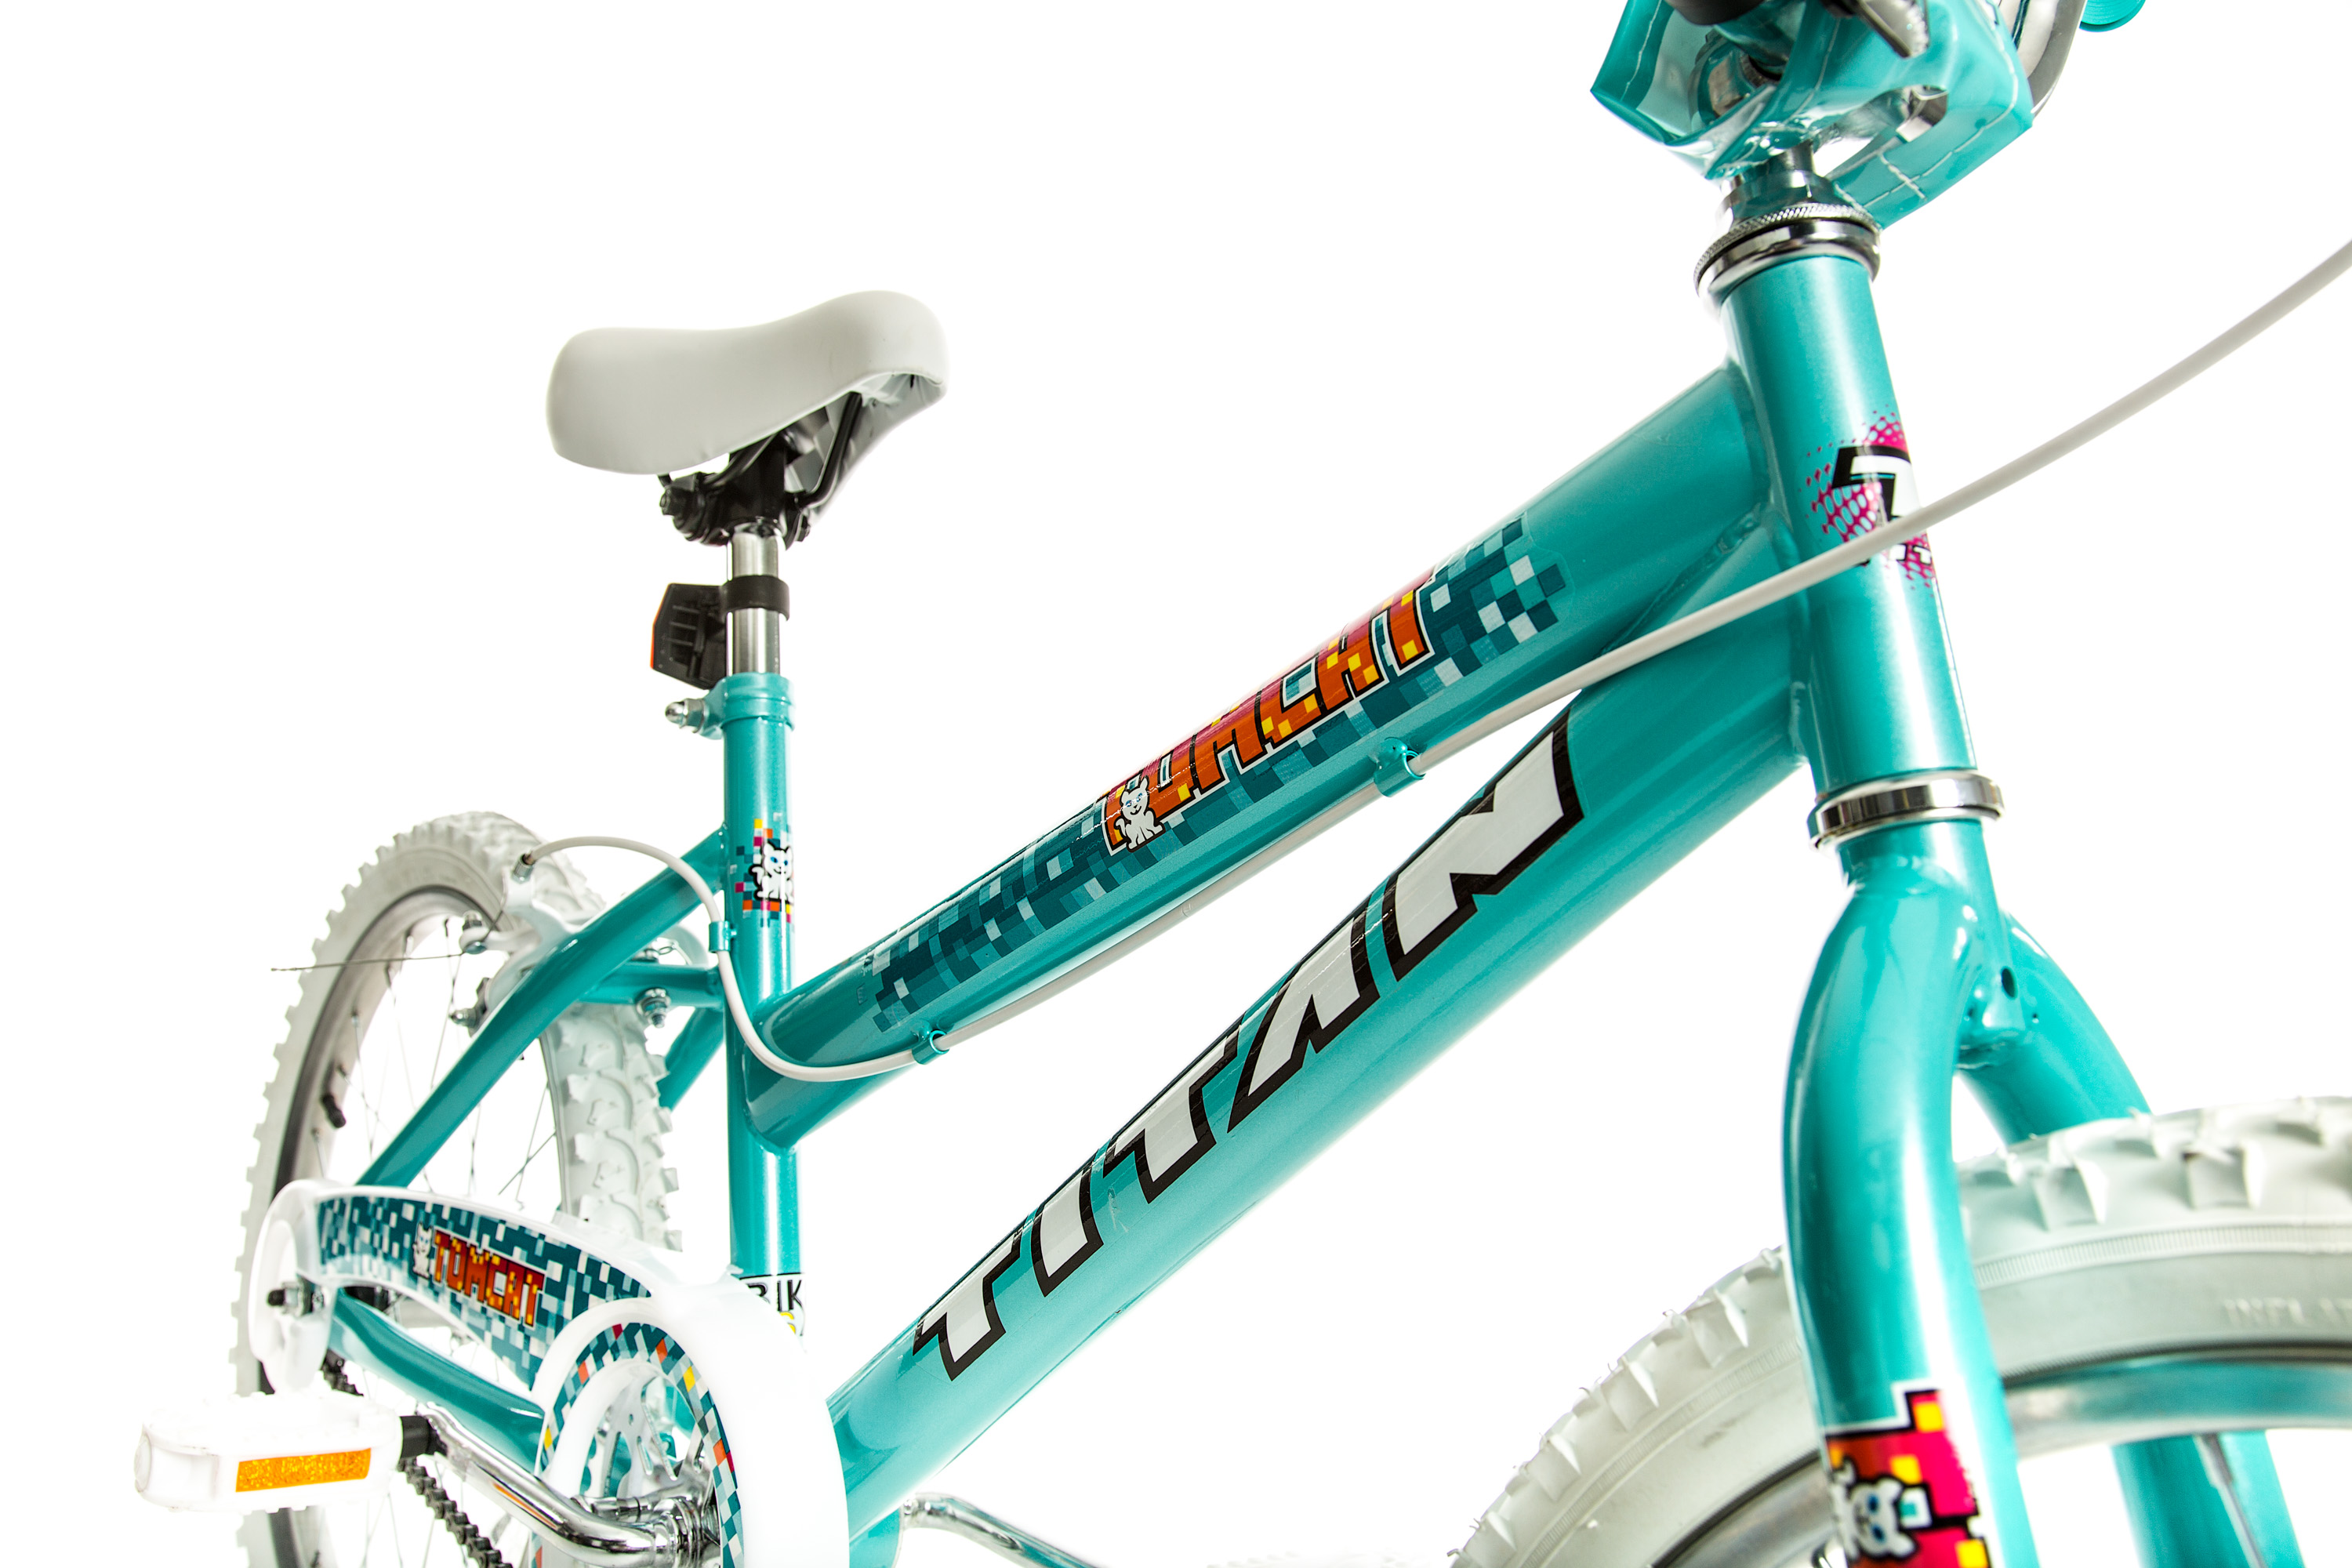 Titan 20 In. Tomcat Girls BMX Bike with Pads, Teal Blue - image 2 of 5